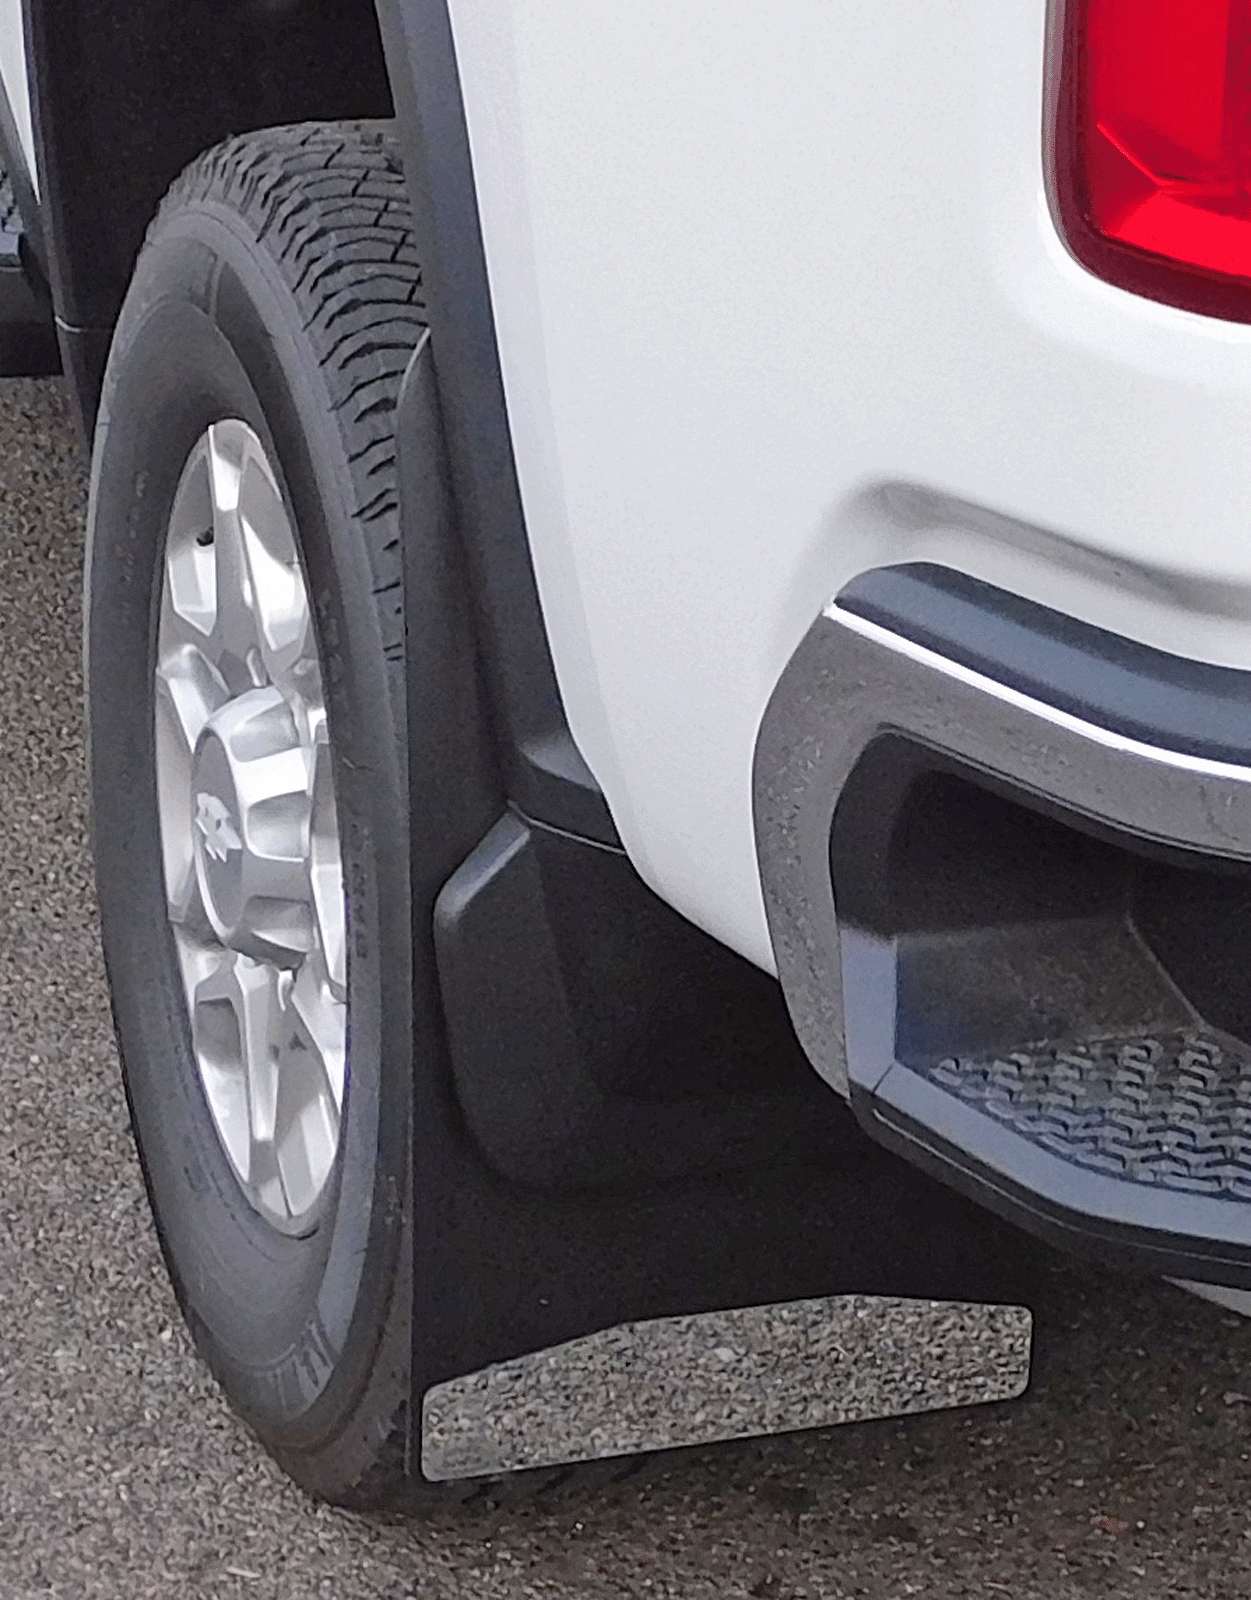 Fits Silverado/Sierra Mud Flaps 99-06 Guards Splash 4pc Front Rear without Flare